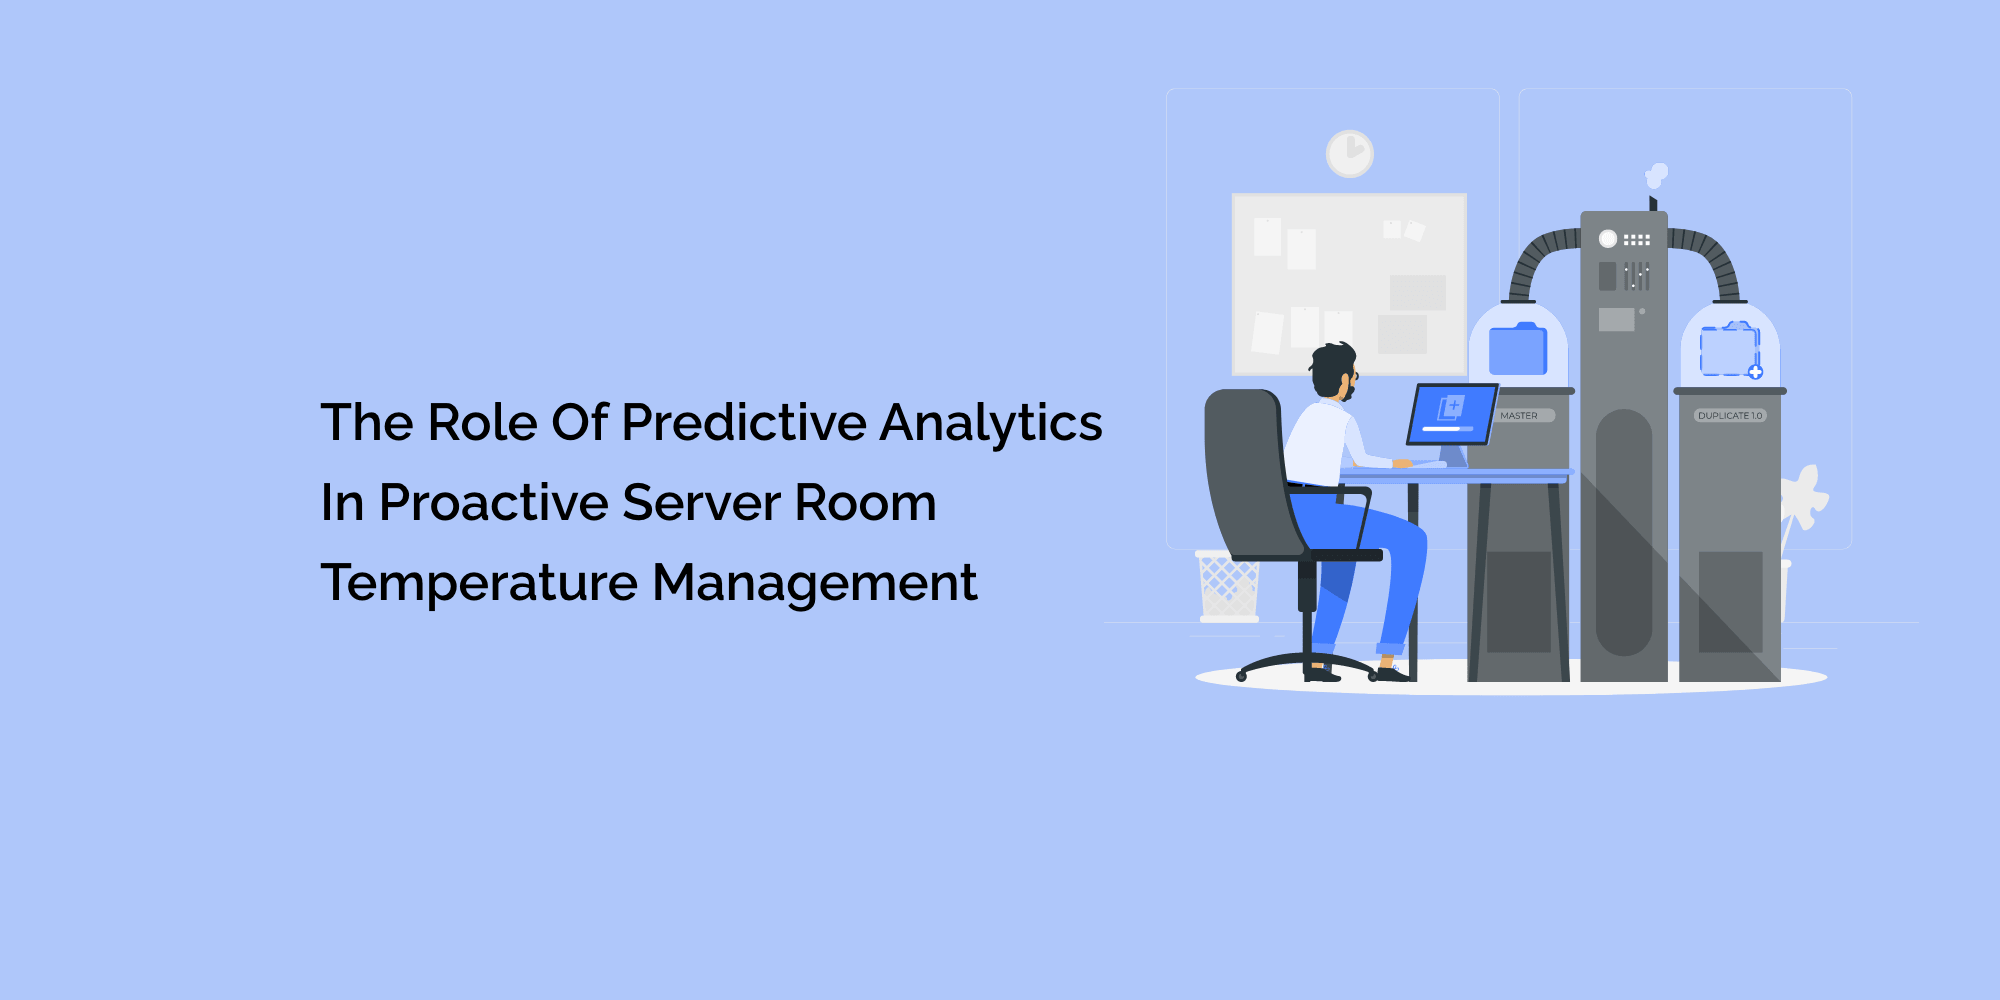 The Role of Predictive Analytics in Proactive Server Room Temperature Management